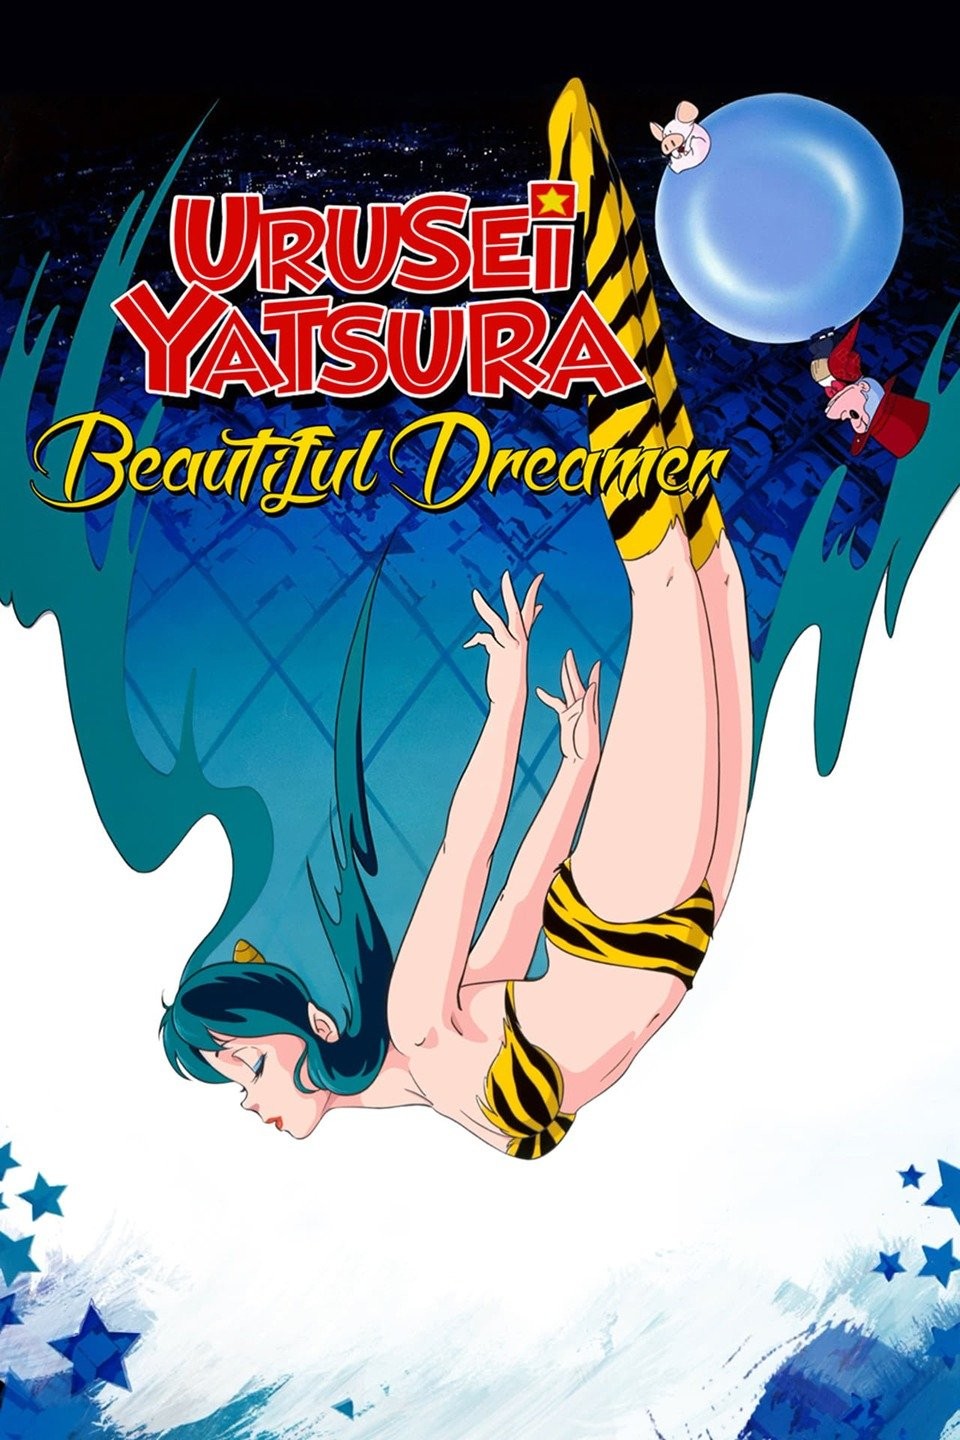 Urusei Yatsura episode 6 release date, where to watch, what to expect, and  more